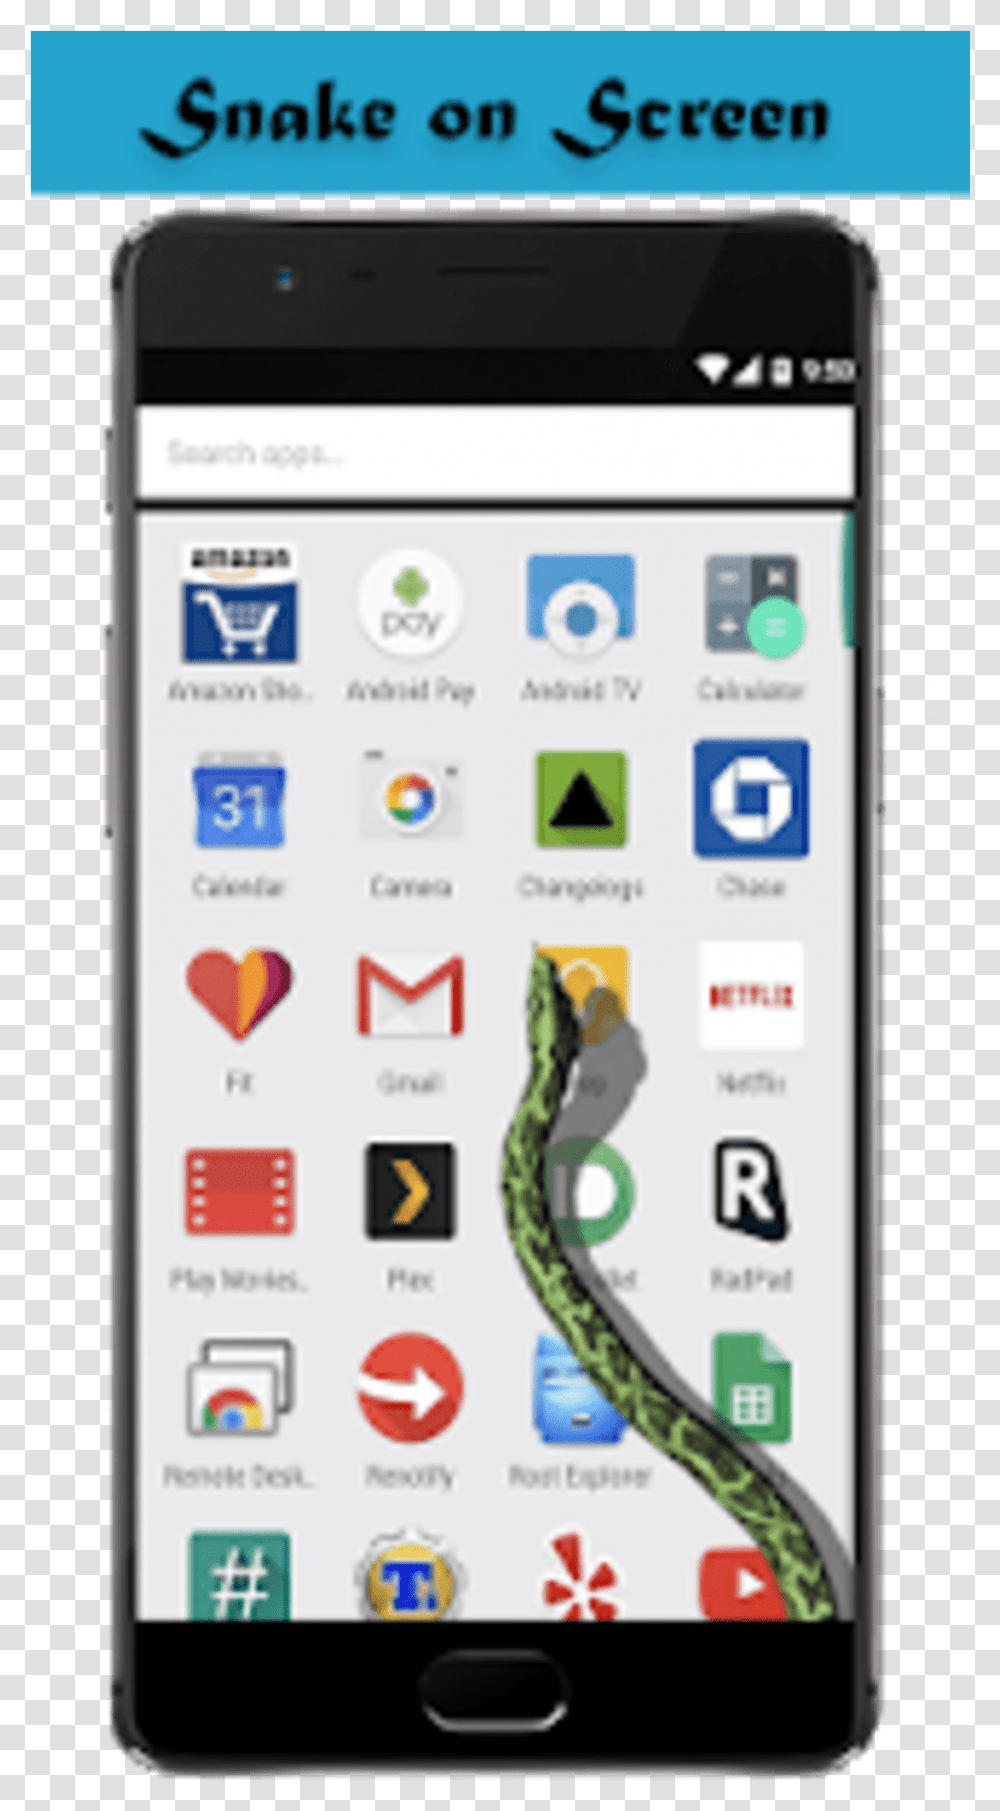 Snake In Phone On Hand Iphone, Mobile Phone, Electronics, Cell Phone Transparent Png